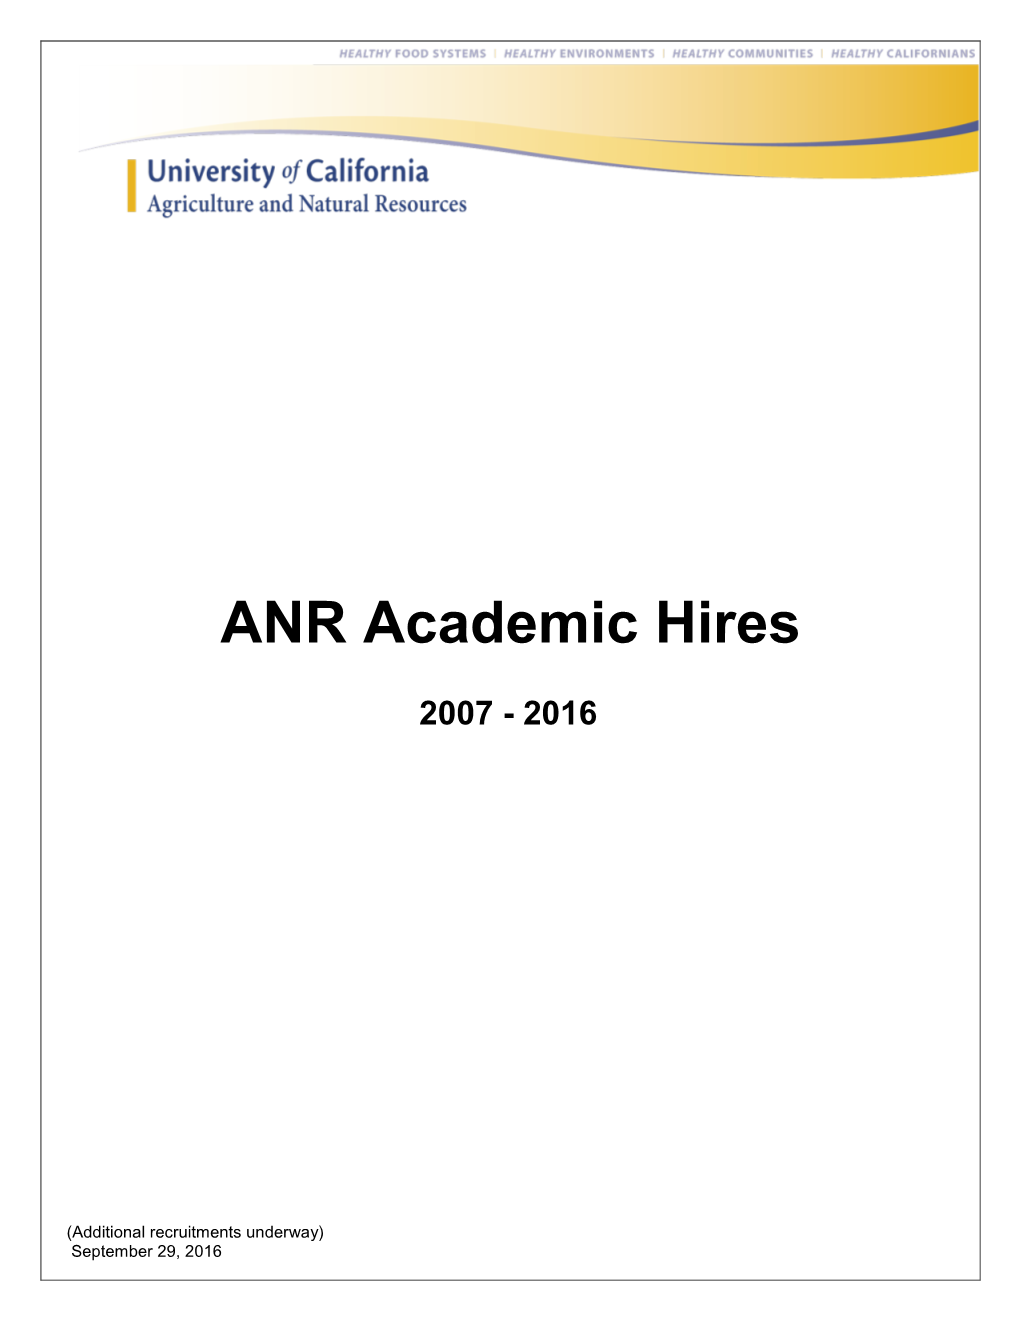 ANR Academic Hires